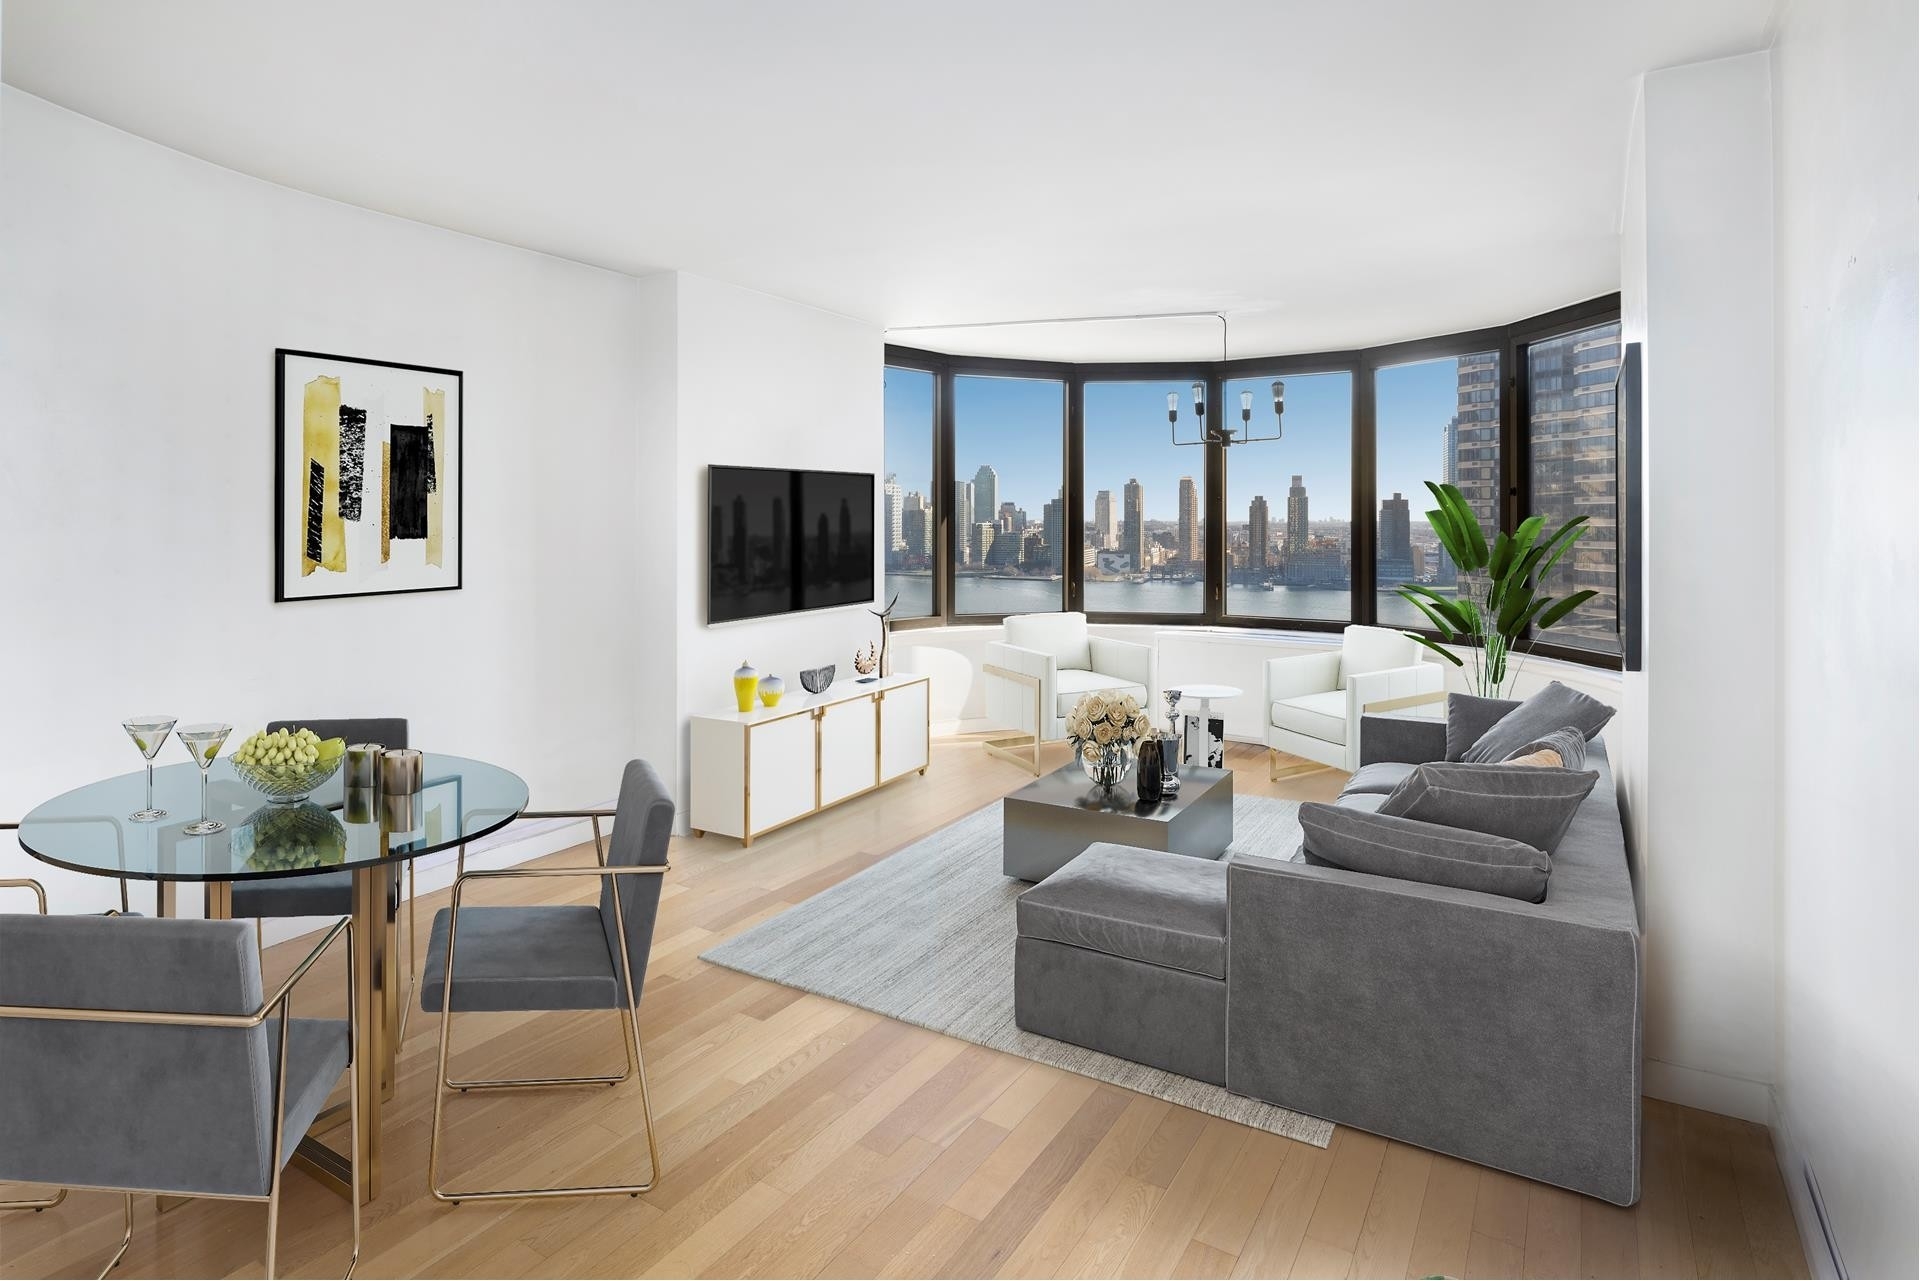 Property at The Corinthian Cond, 330 E 38TH ST, 25K Murray Hill, New York, NY 10016